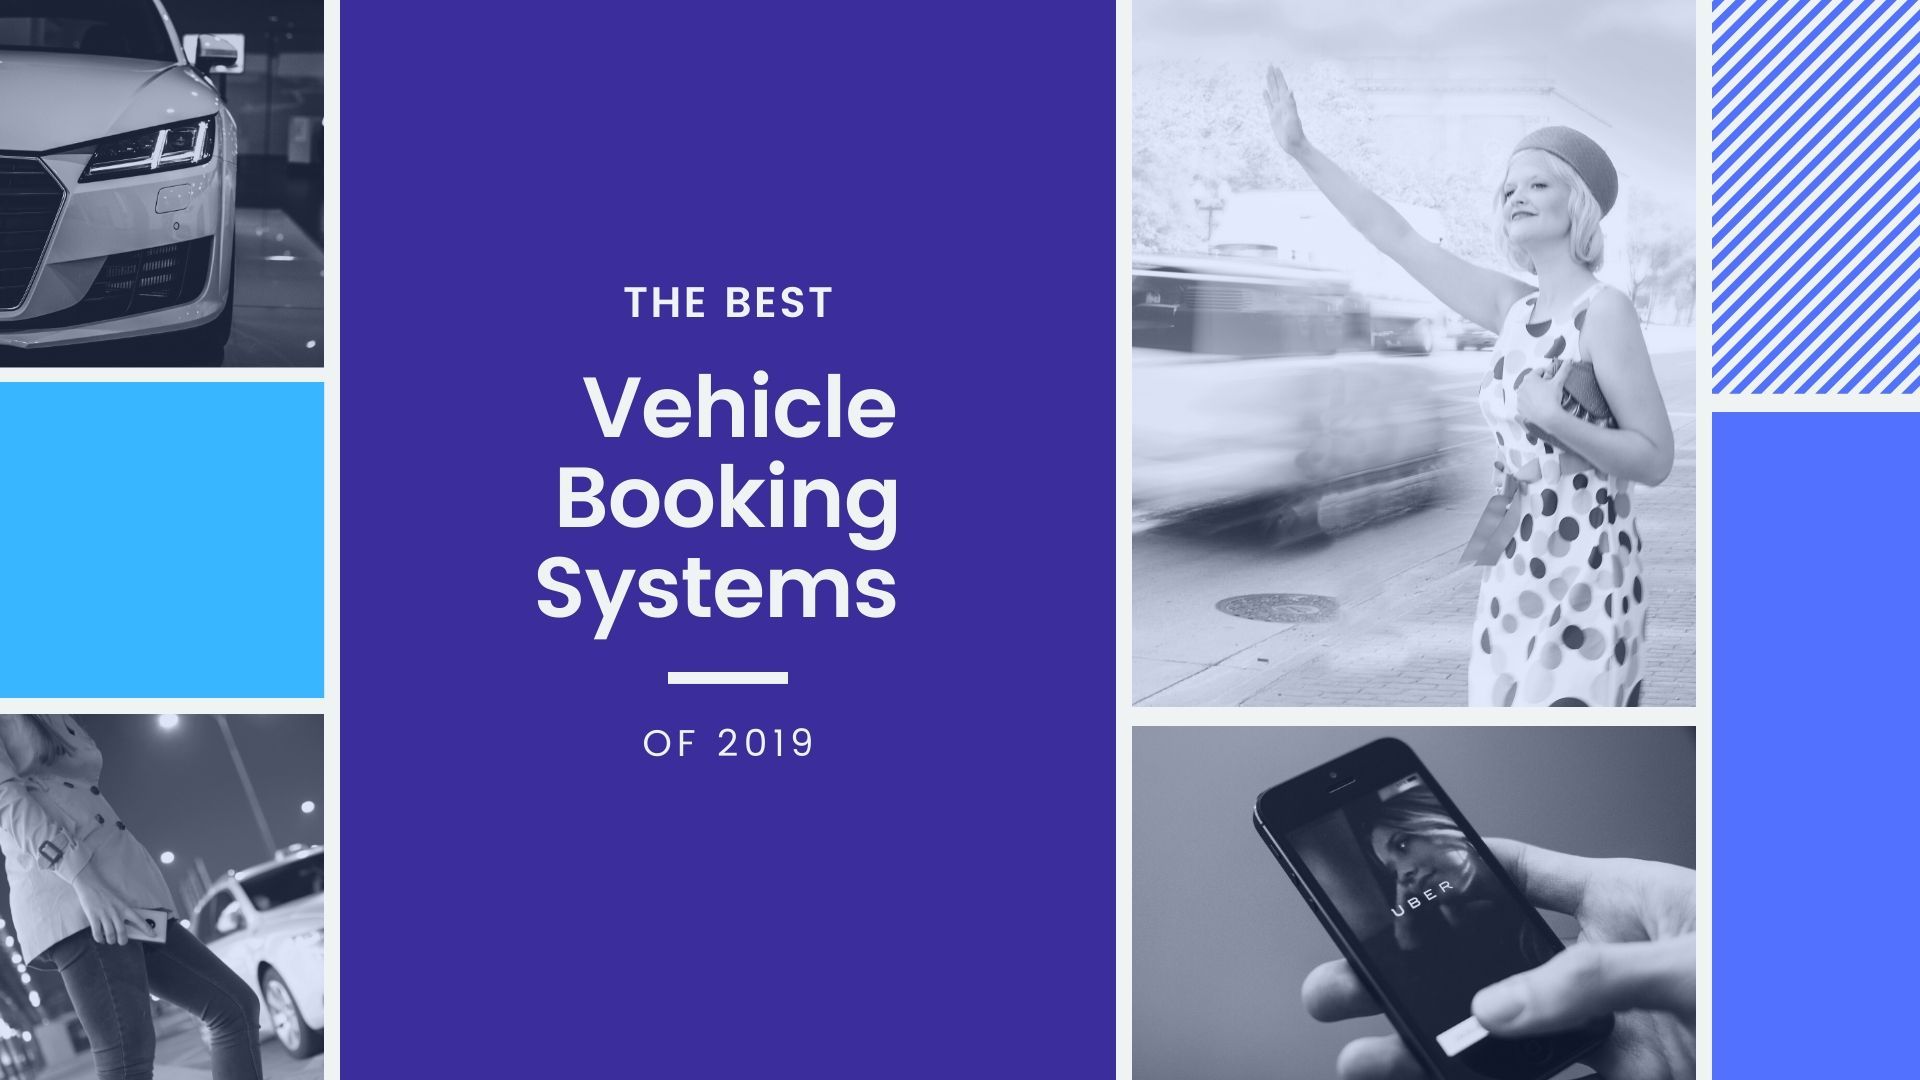 The Best Vehicle Booking Systems of 2019